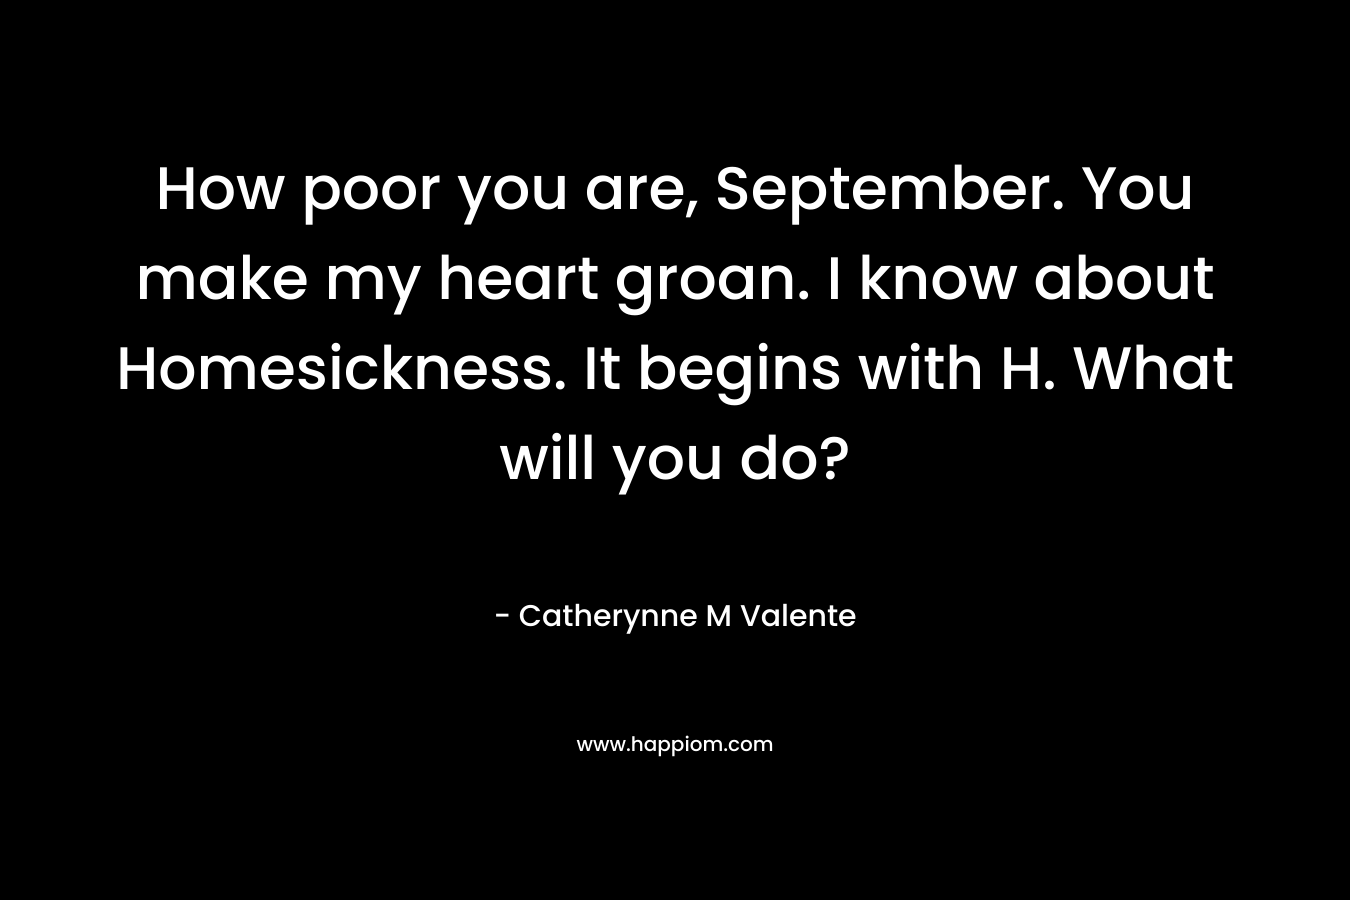 How poor you are, September. You make my heart groan. I know about Homesickness. It begins with H. What will you do? – Catherynne M Valente